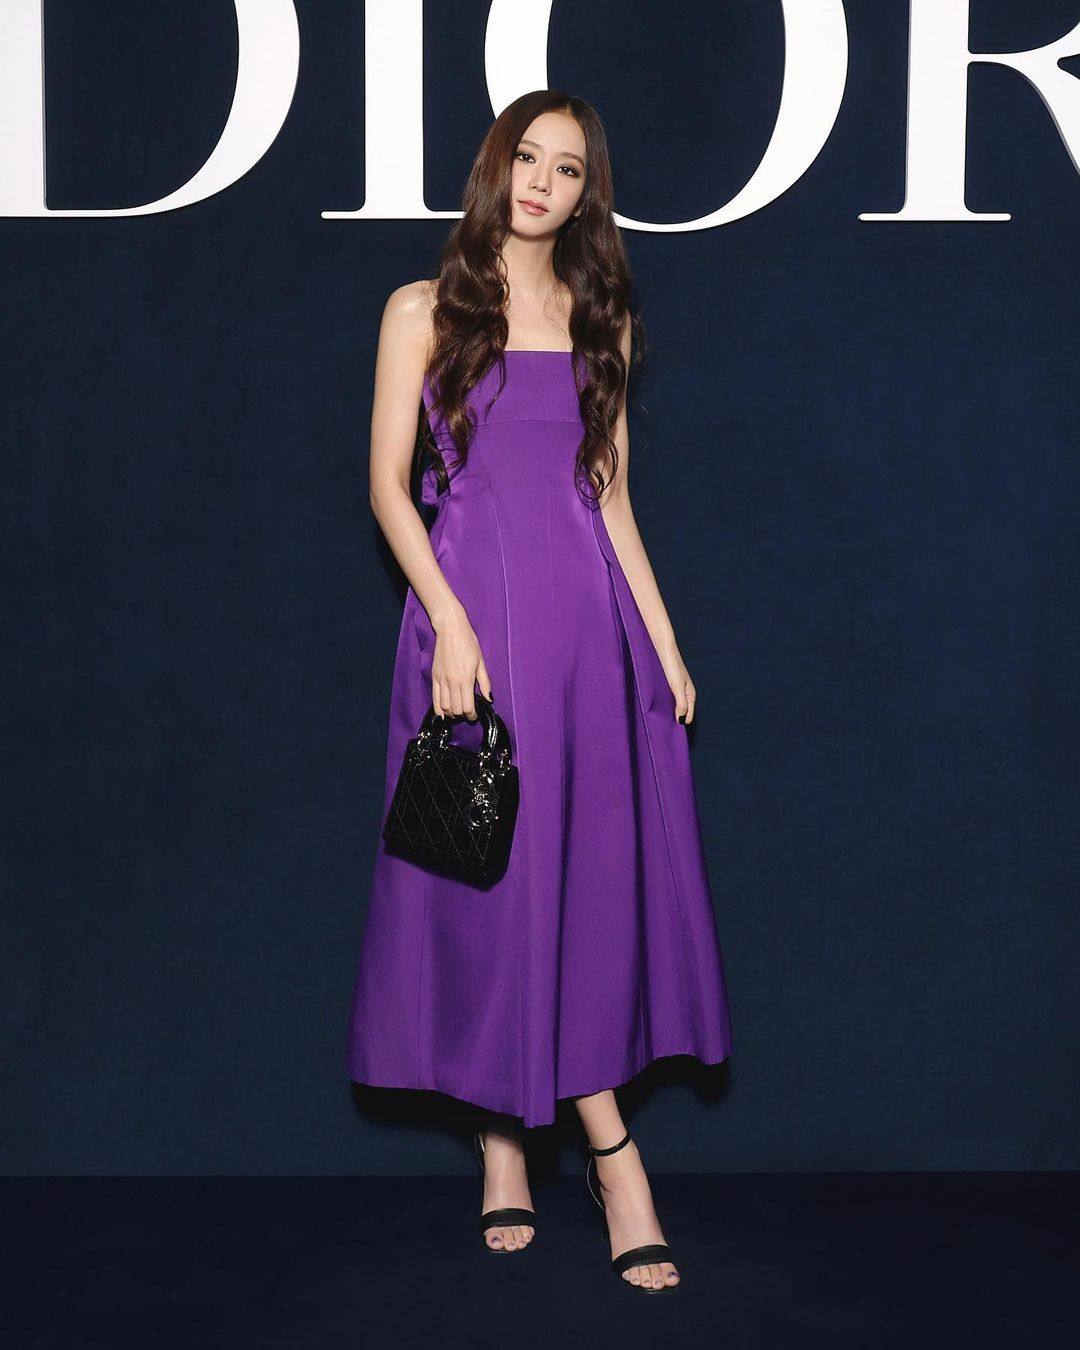 Jisoo of K-pop girl group Blackpink in a purple strapless dress at a Dior fashion event. Purple dye was hard to obtain thousands of years ago and purple fabric the preserve of the Roman elite and later the Byzantine imperial court. Photo: Instagram/@sooyaaa_